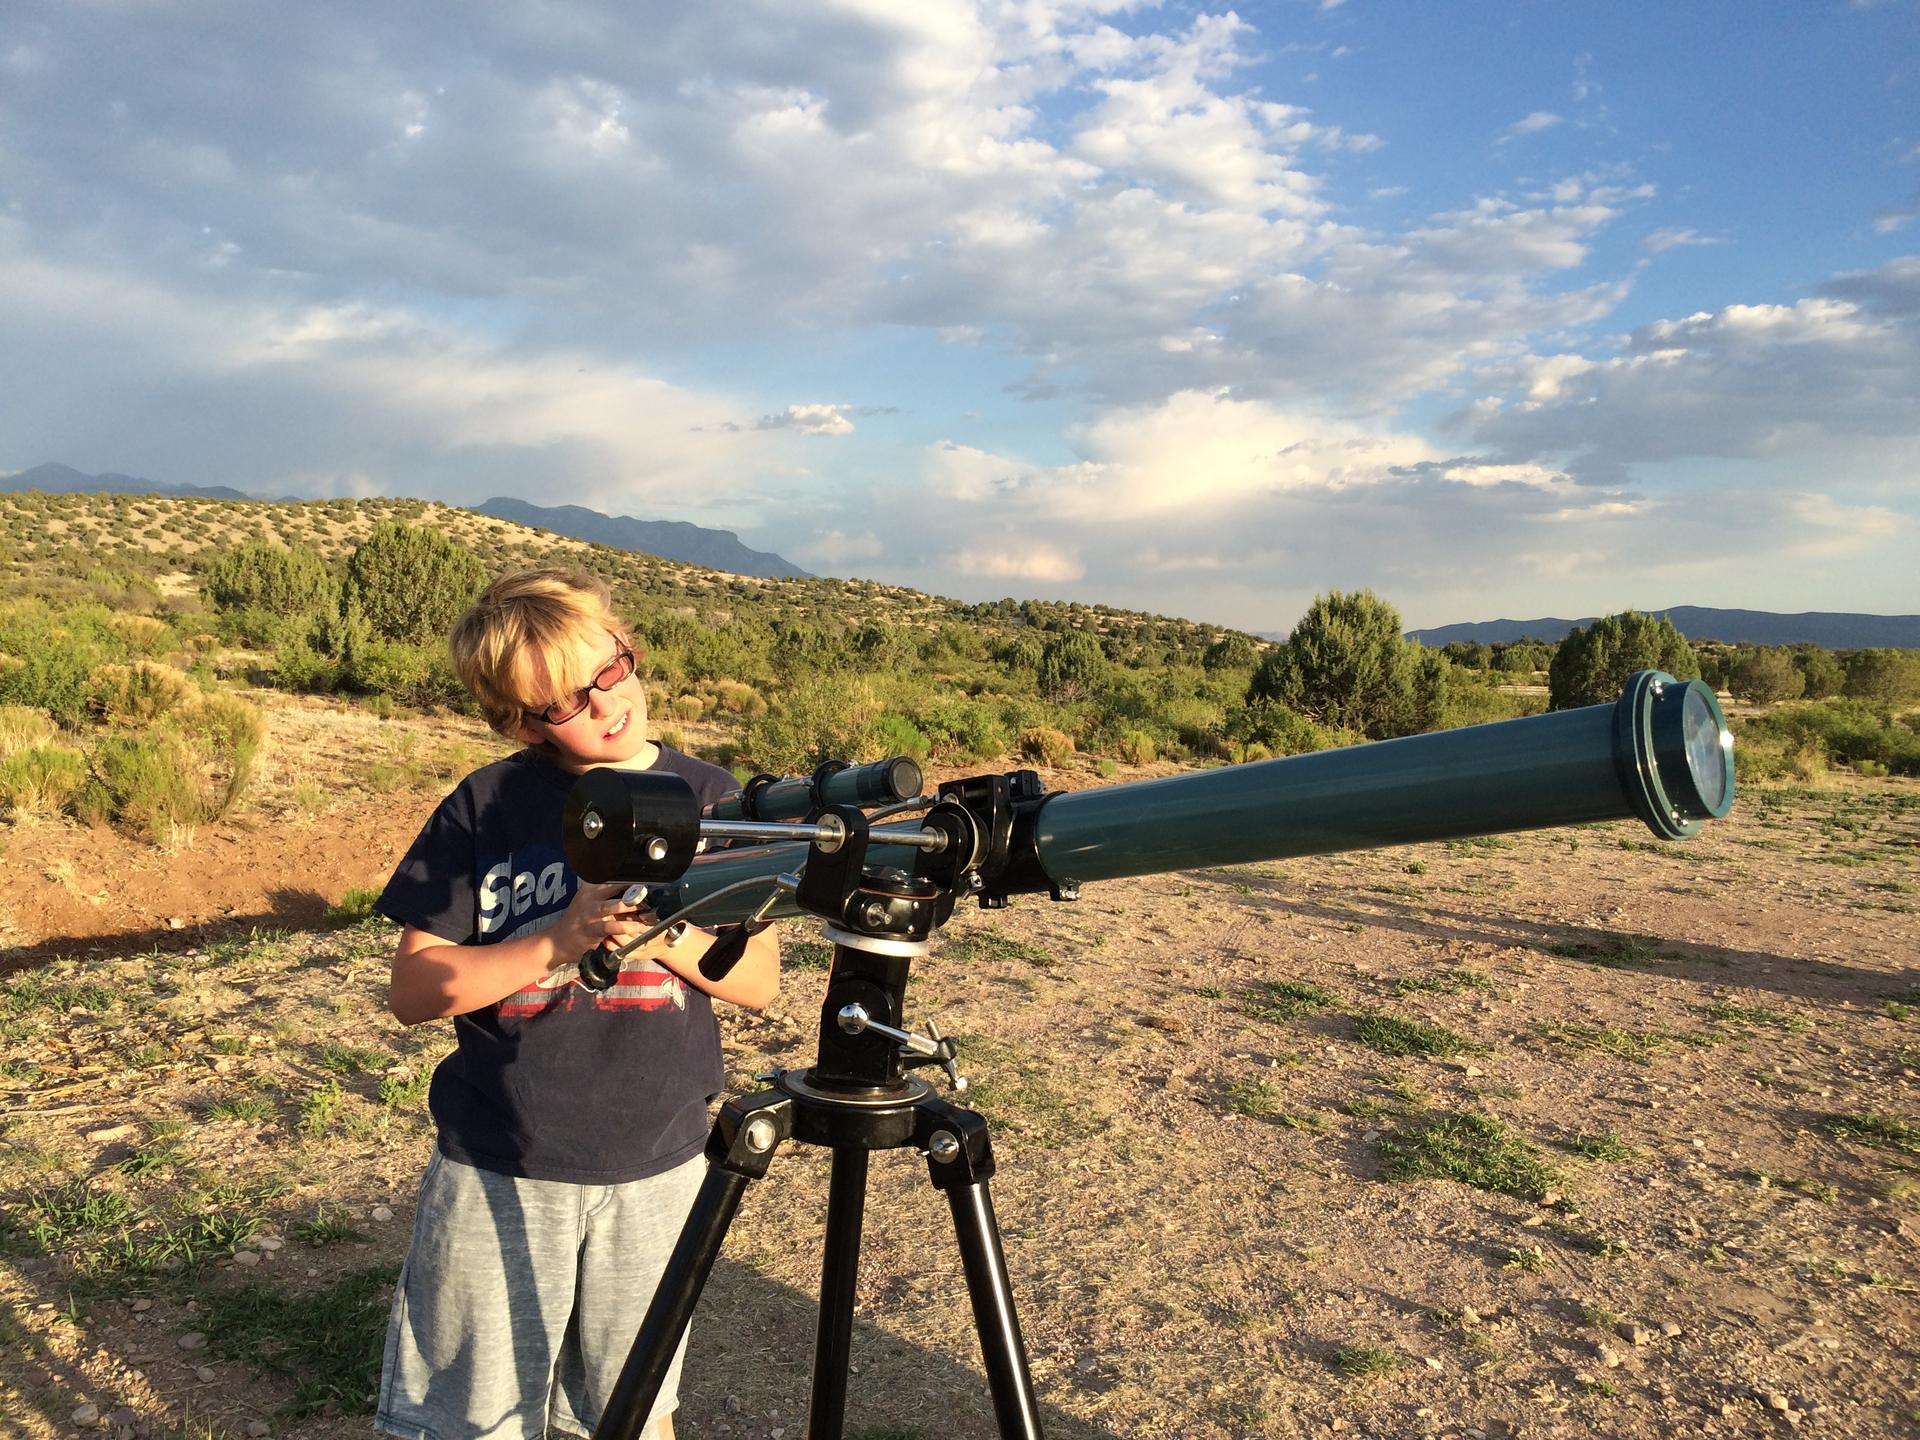 Michael Calkins, 12, became interested in the stars when he saw the International Space Station fly over his home in Silver City, New Mexico.